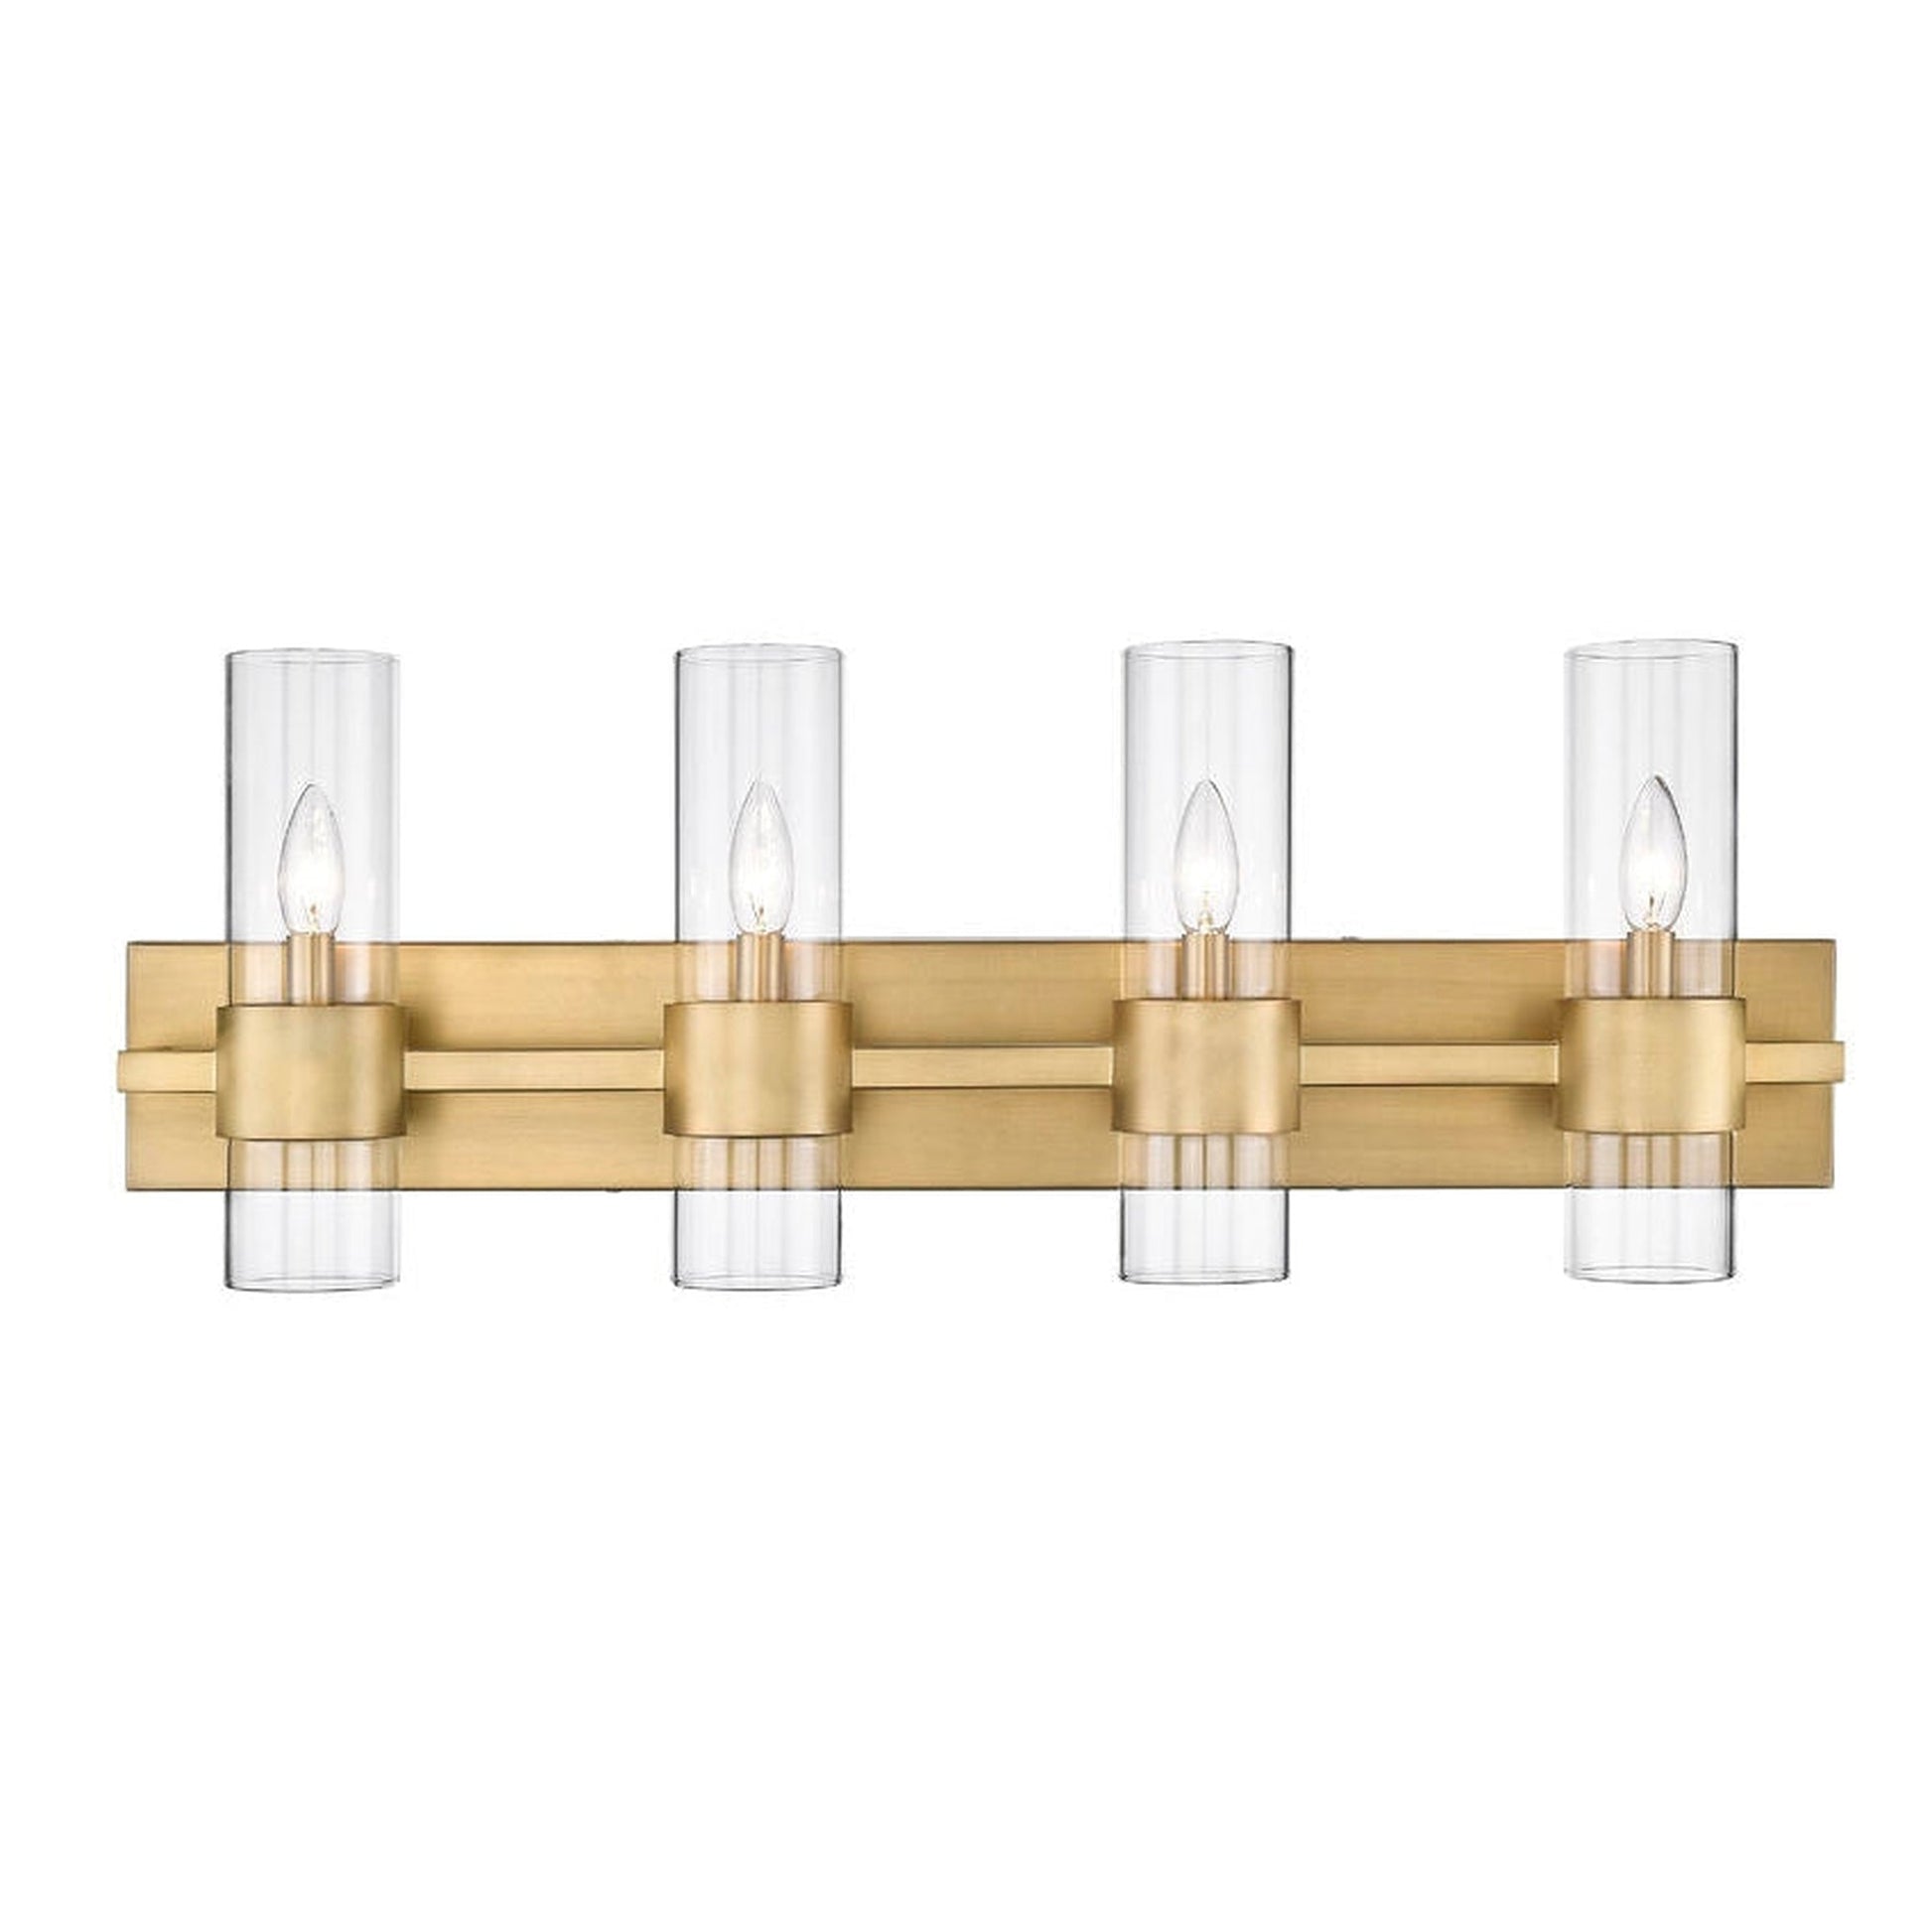 Z-Lite Lawson 32" 4-Light Rubbed Brass Vanity Light With Clear Glass Shade